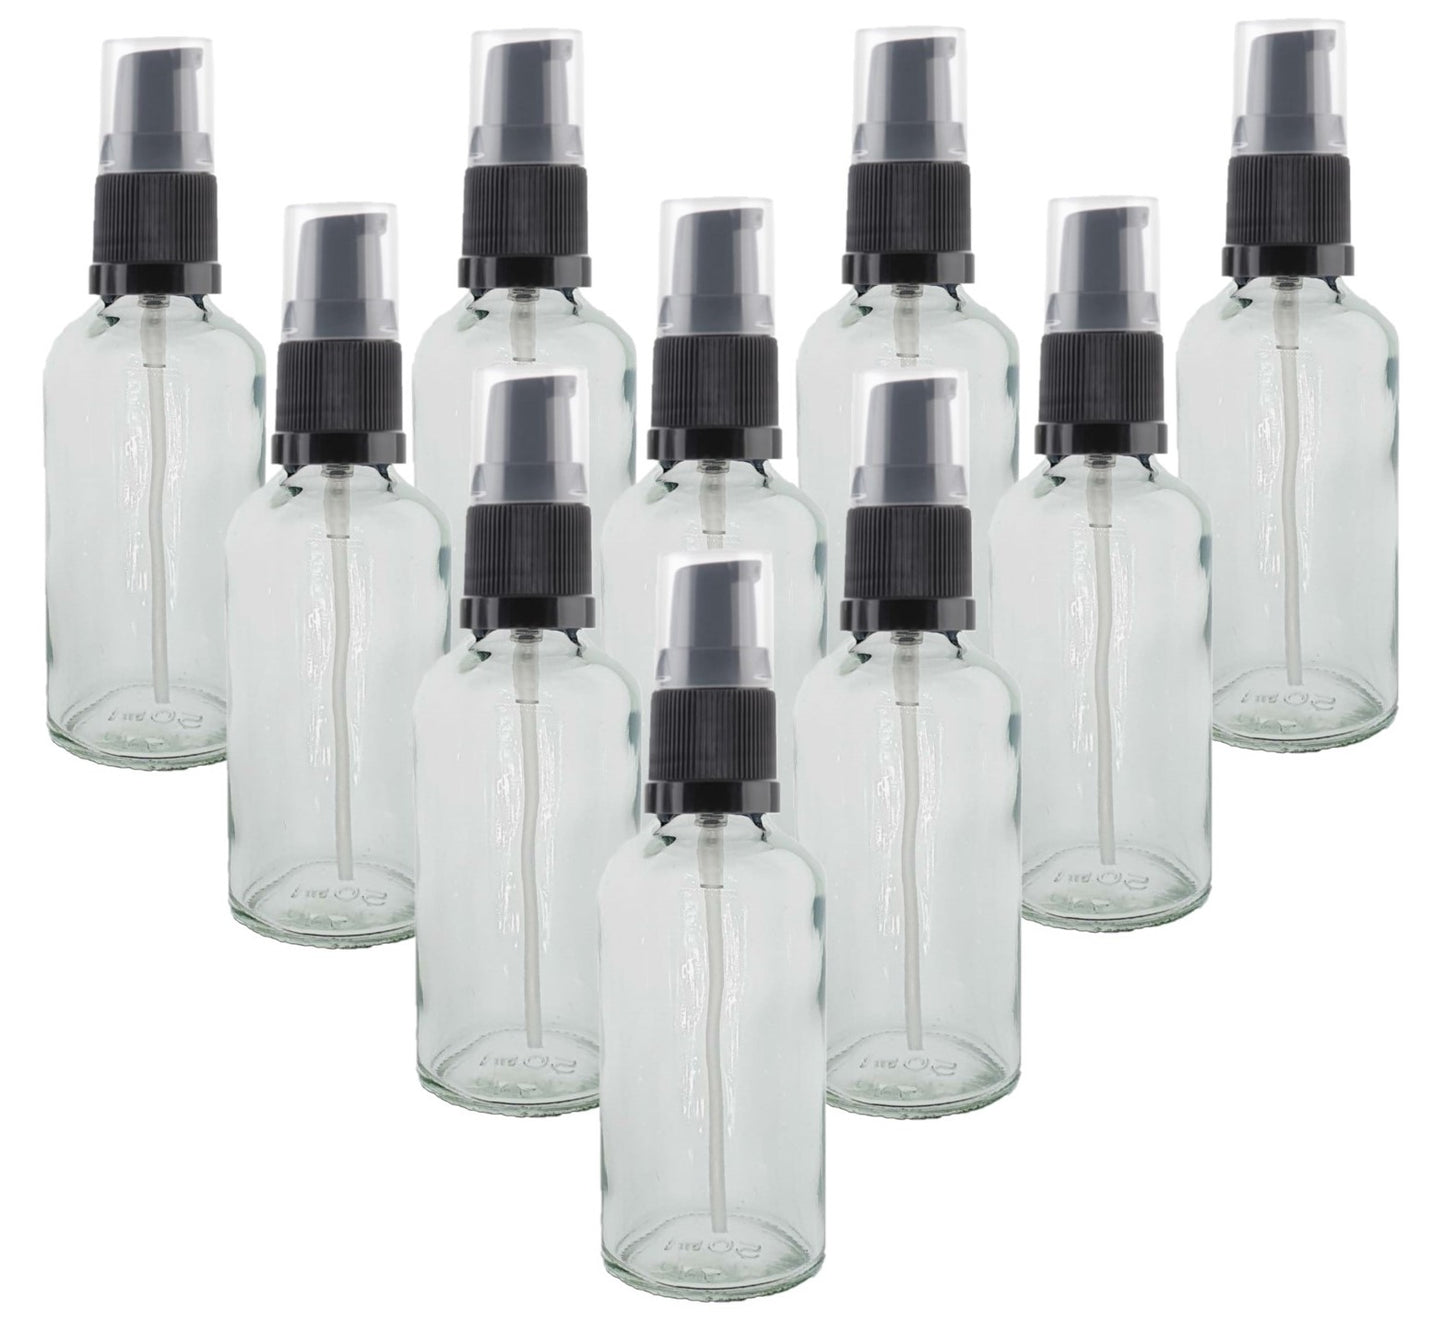 50ml Clear Glass Bottles with Black Treatment Pump and Clear Overcap